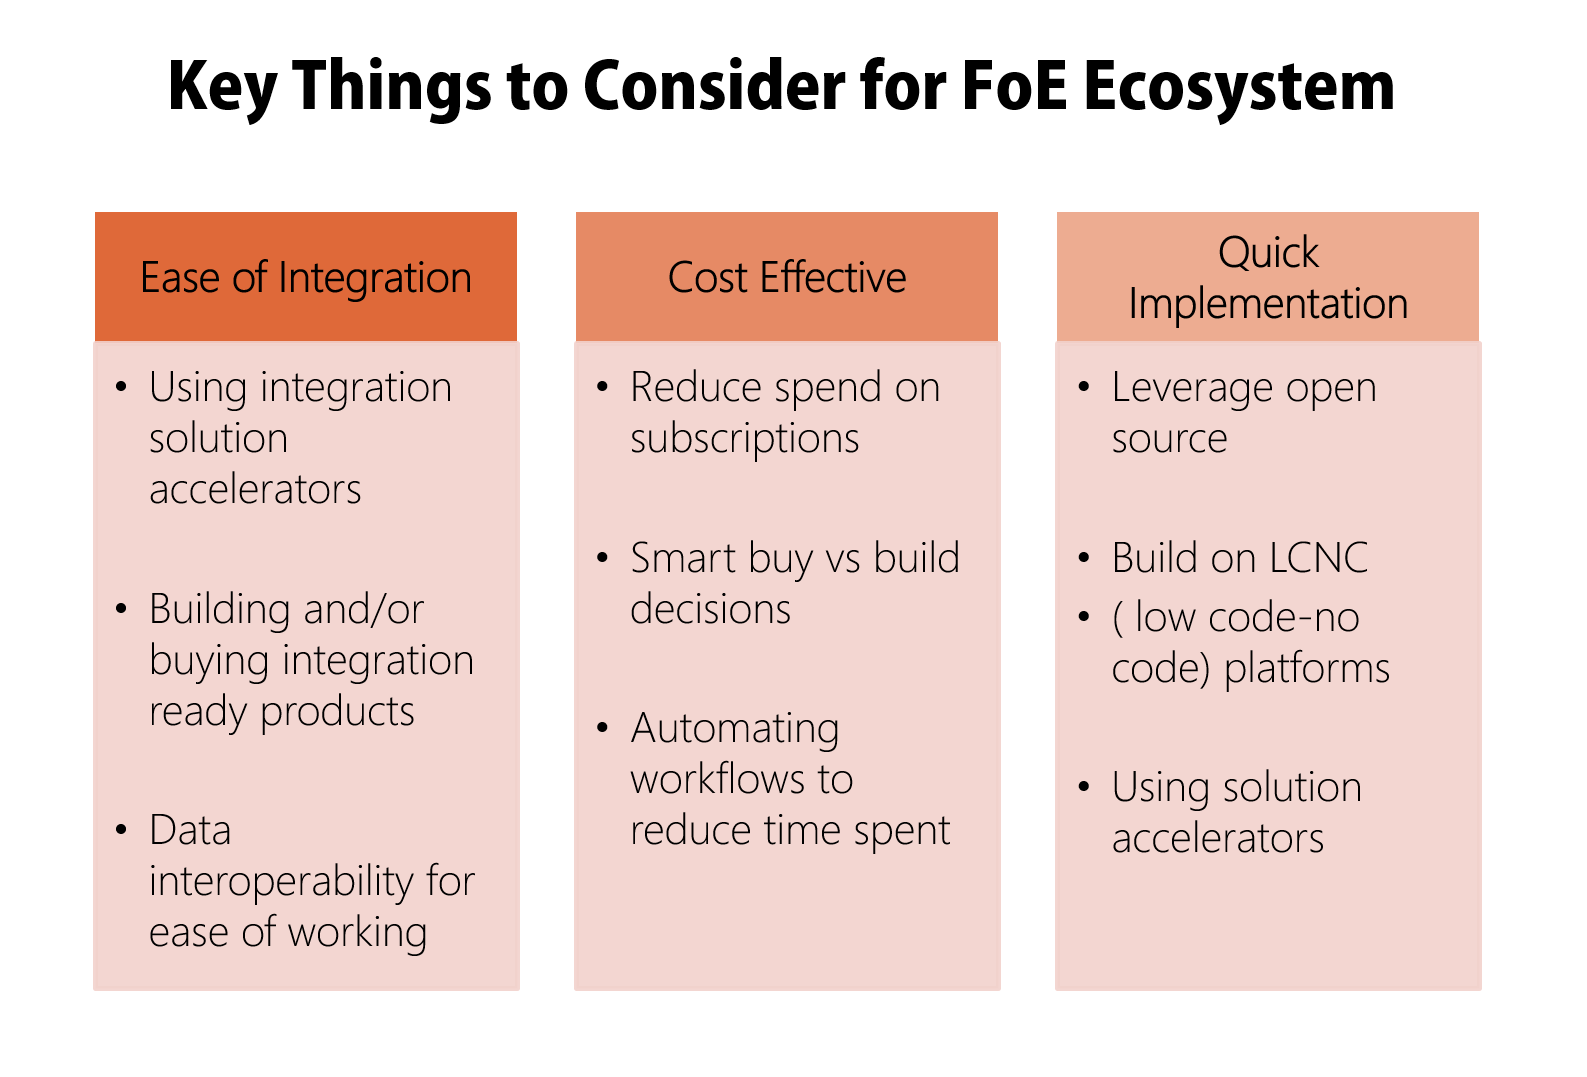 Key things to consider for FoE ecosystem